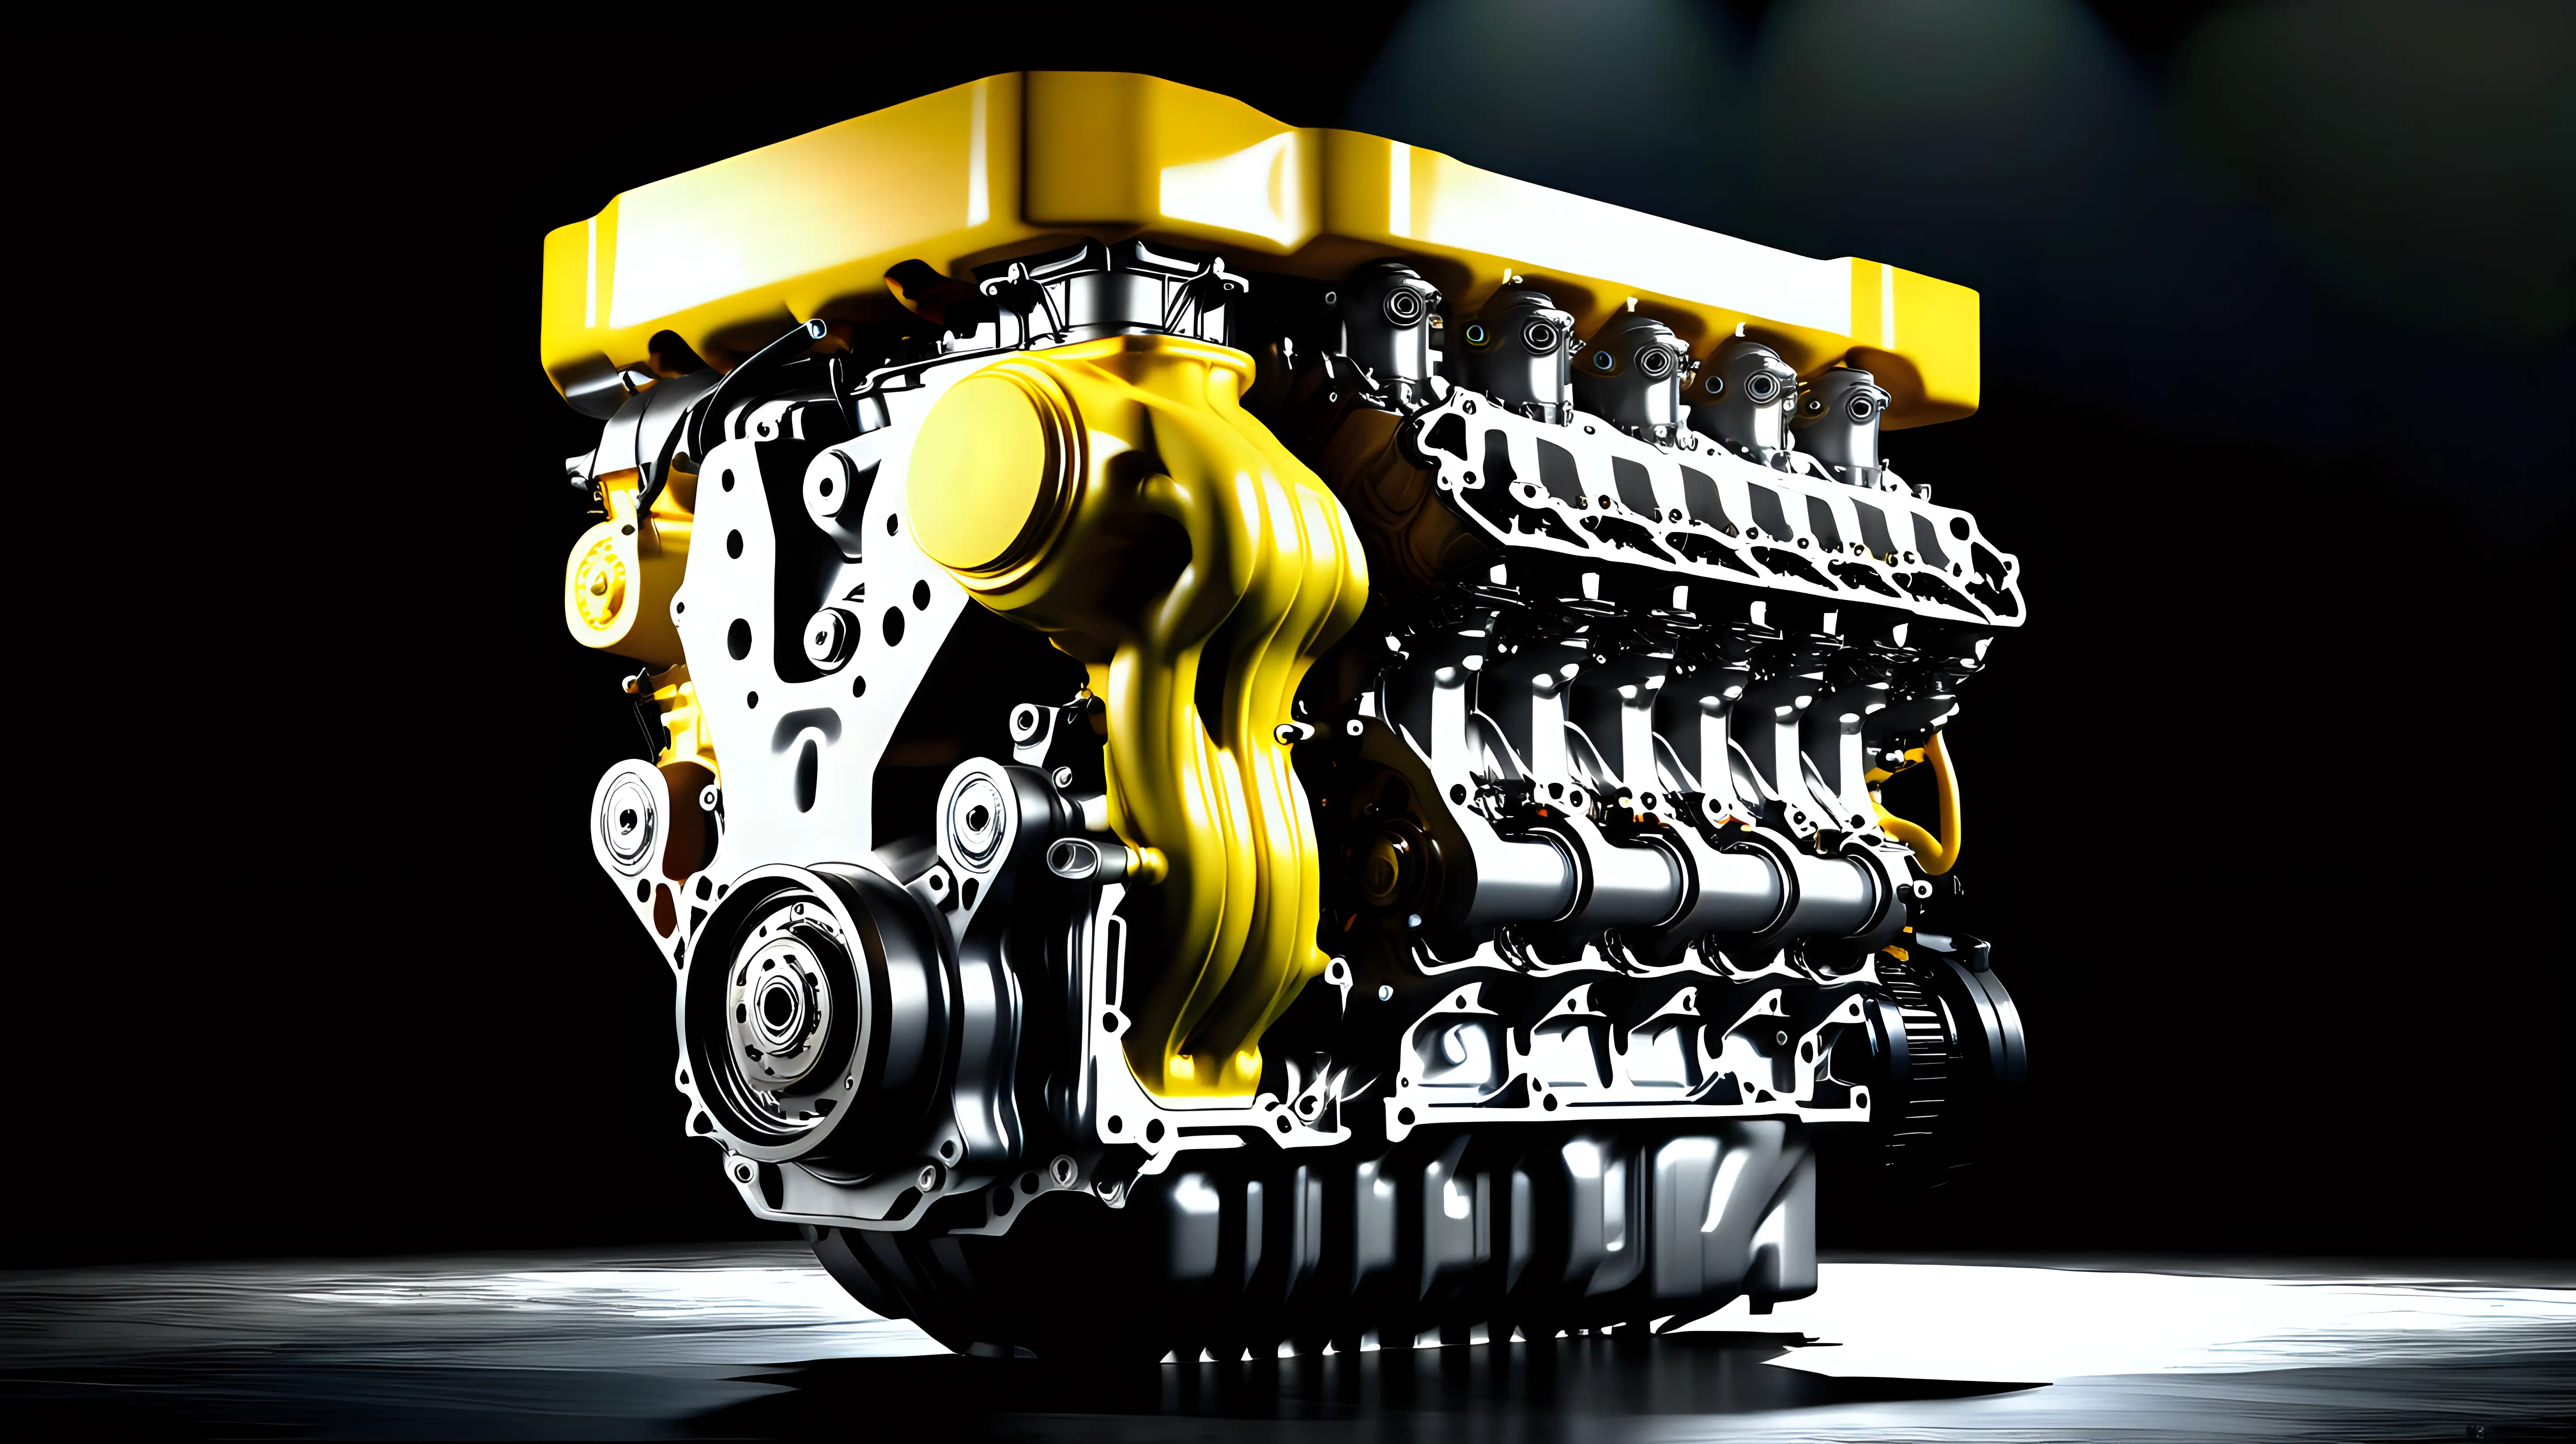 A huge new next gen car engine, on a dark stage waiting to be revealed, with a touch of yellow, to make it conspicous, make it a secondary image. Please note, no car, just engine